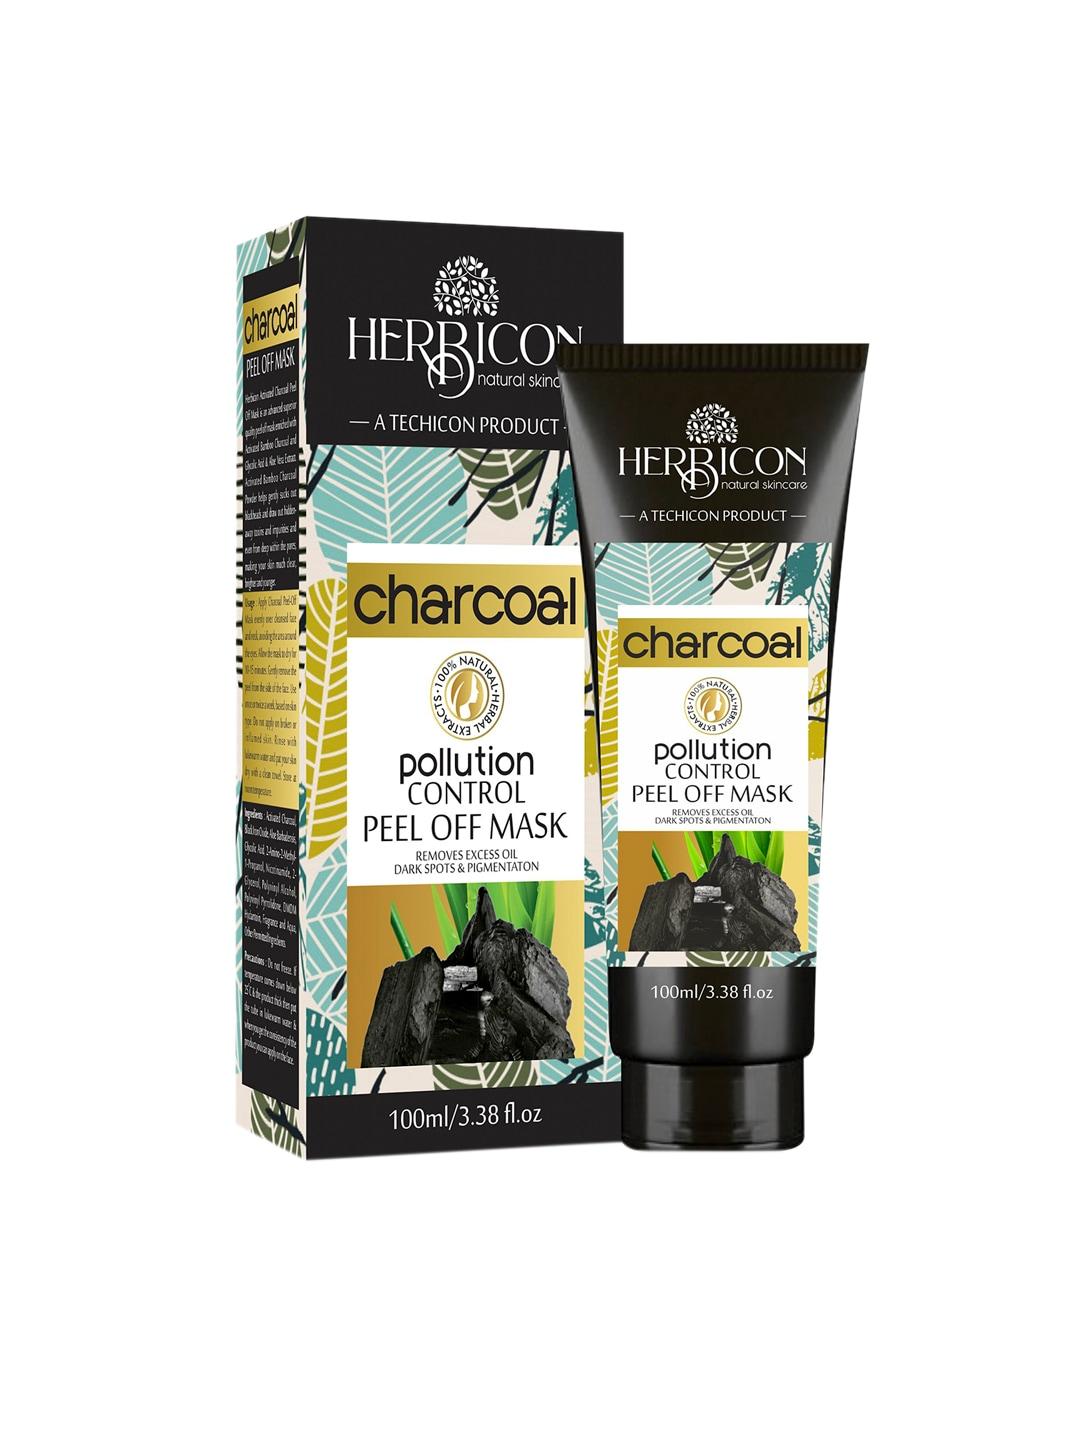 herbicon activated bamboo charcoal peel off mask-100 ml